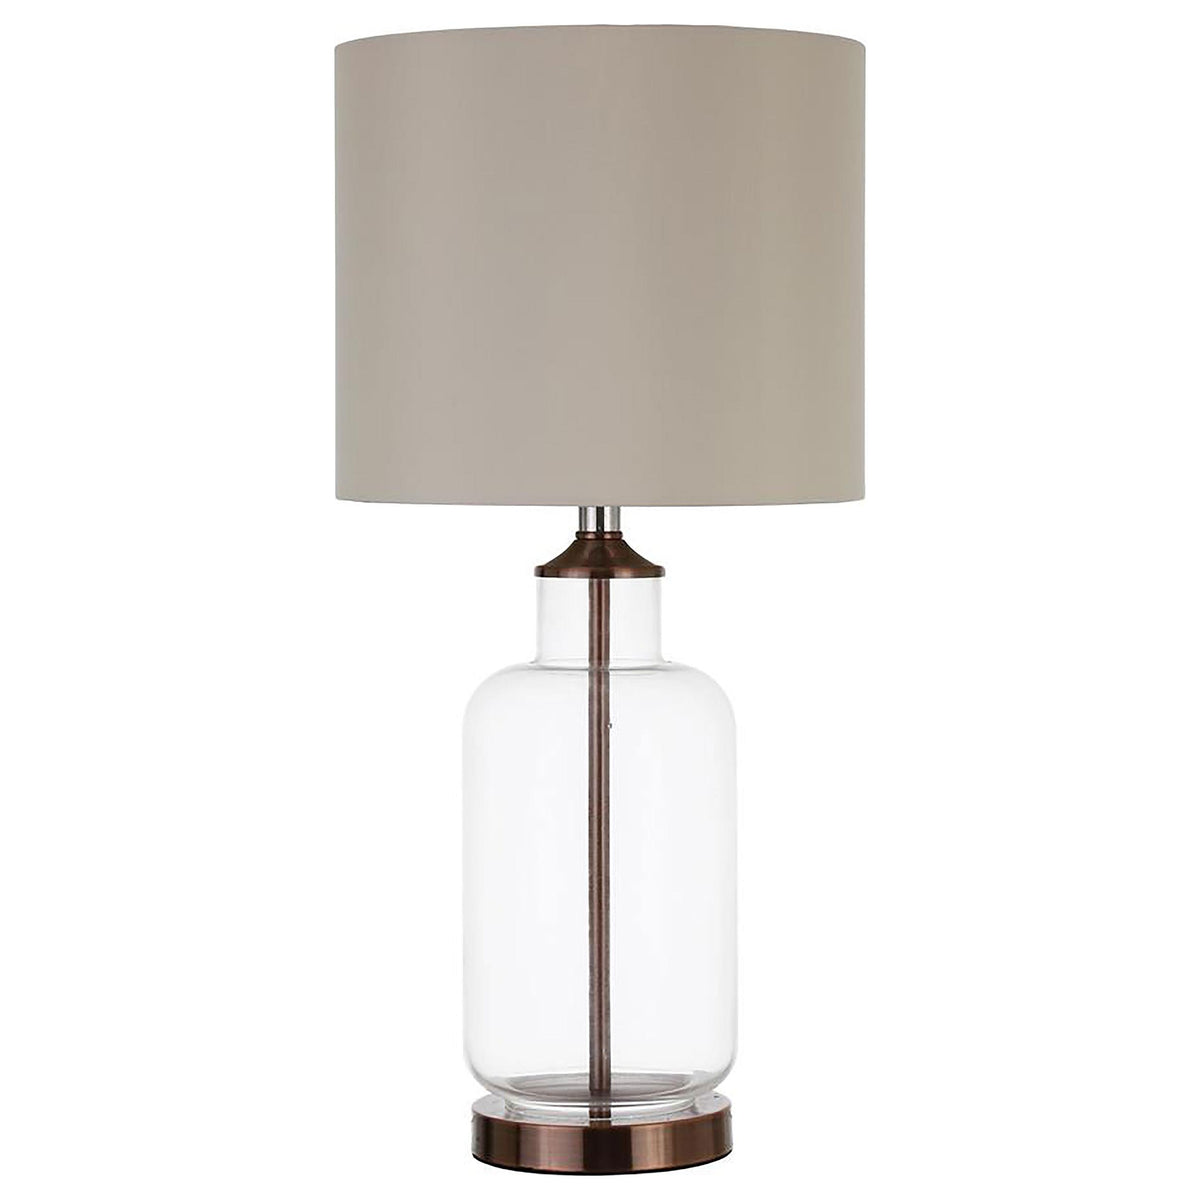 Aisha Drum Shade Table Lamp Creamy Beige and Clear Aisha Drum Shade Table Lamp Creamy Beige and Clear Half Price Furniture